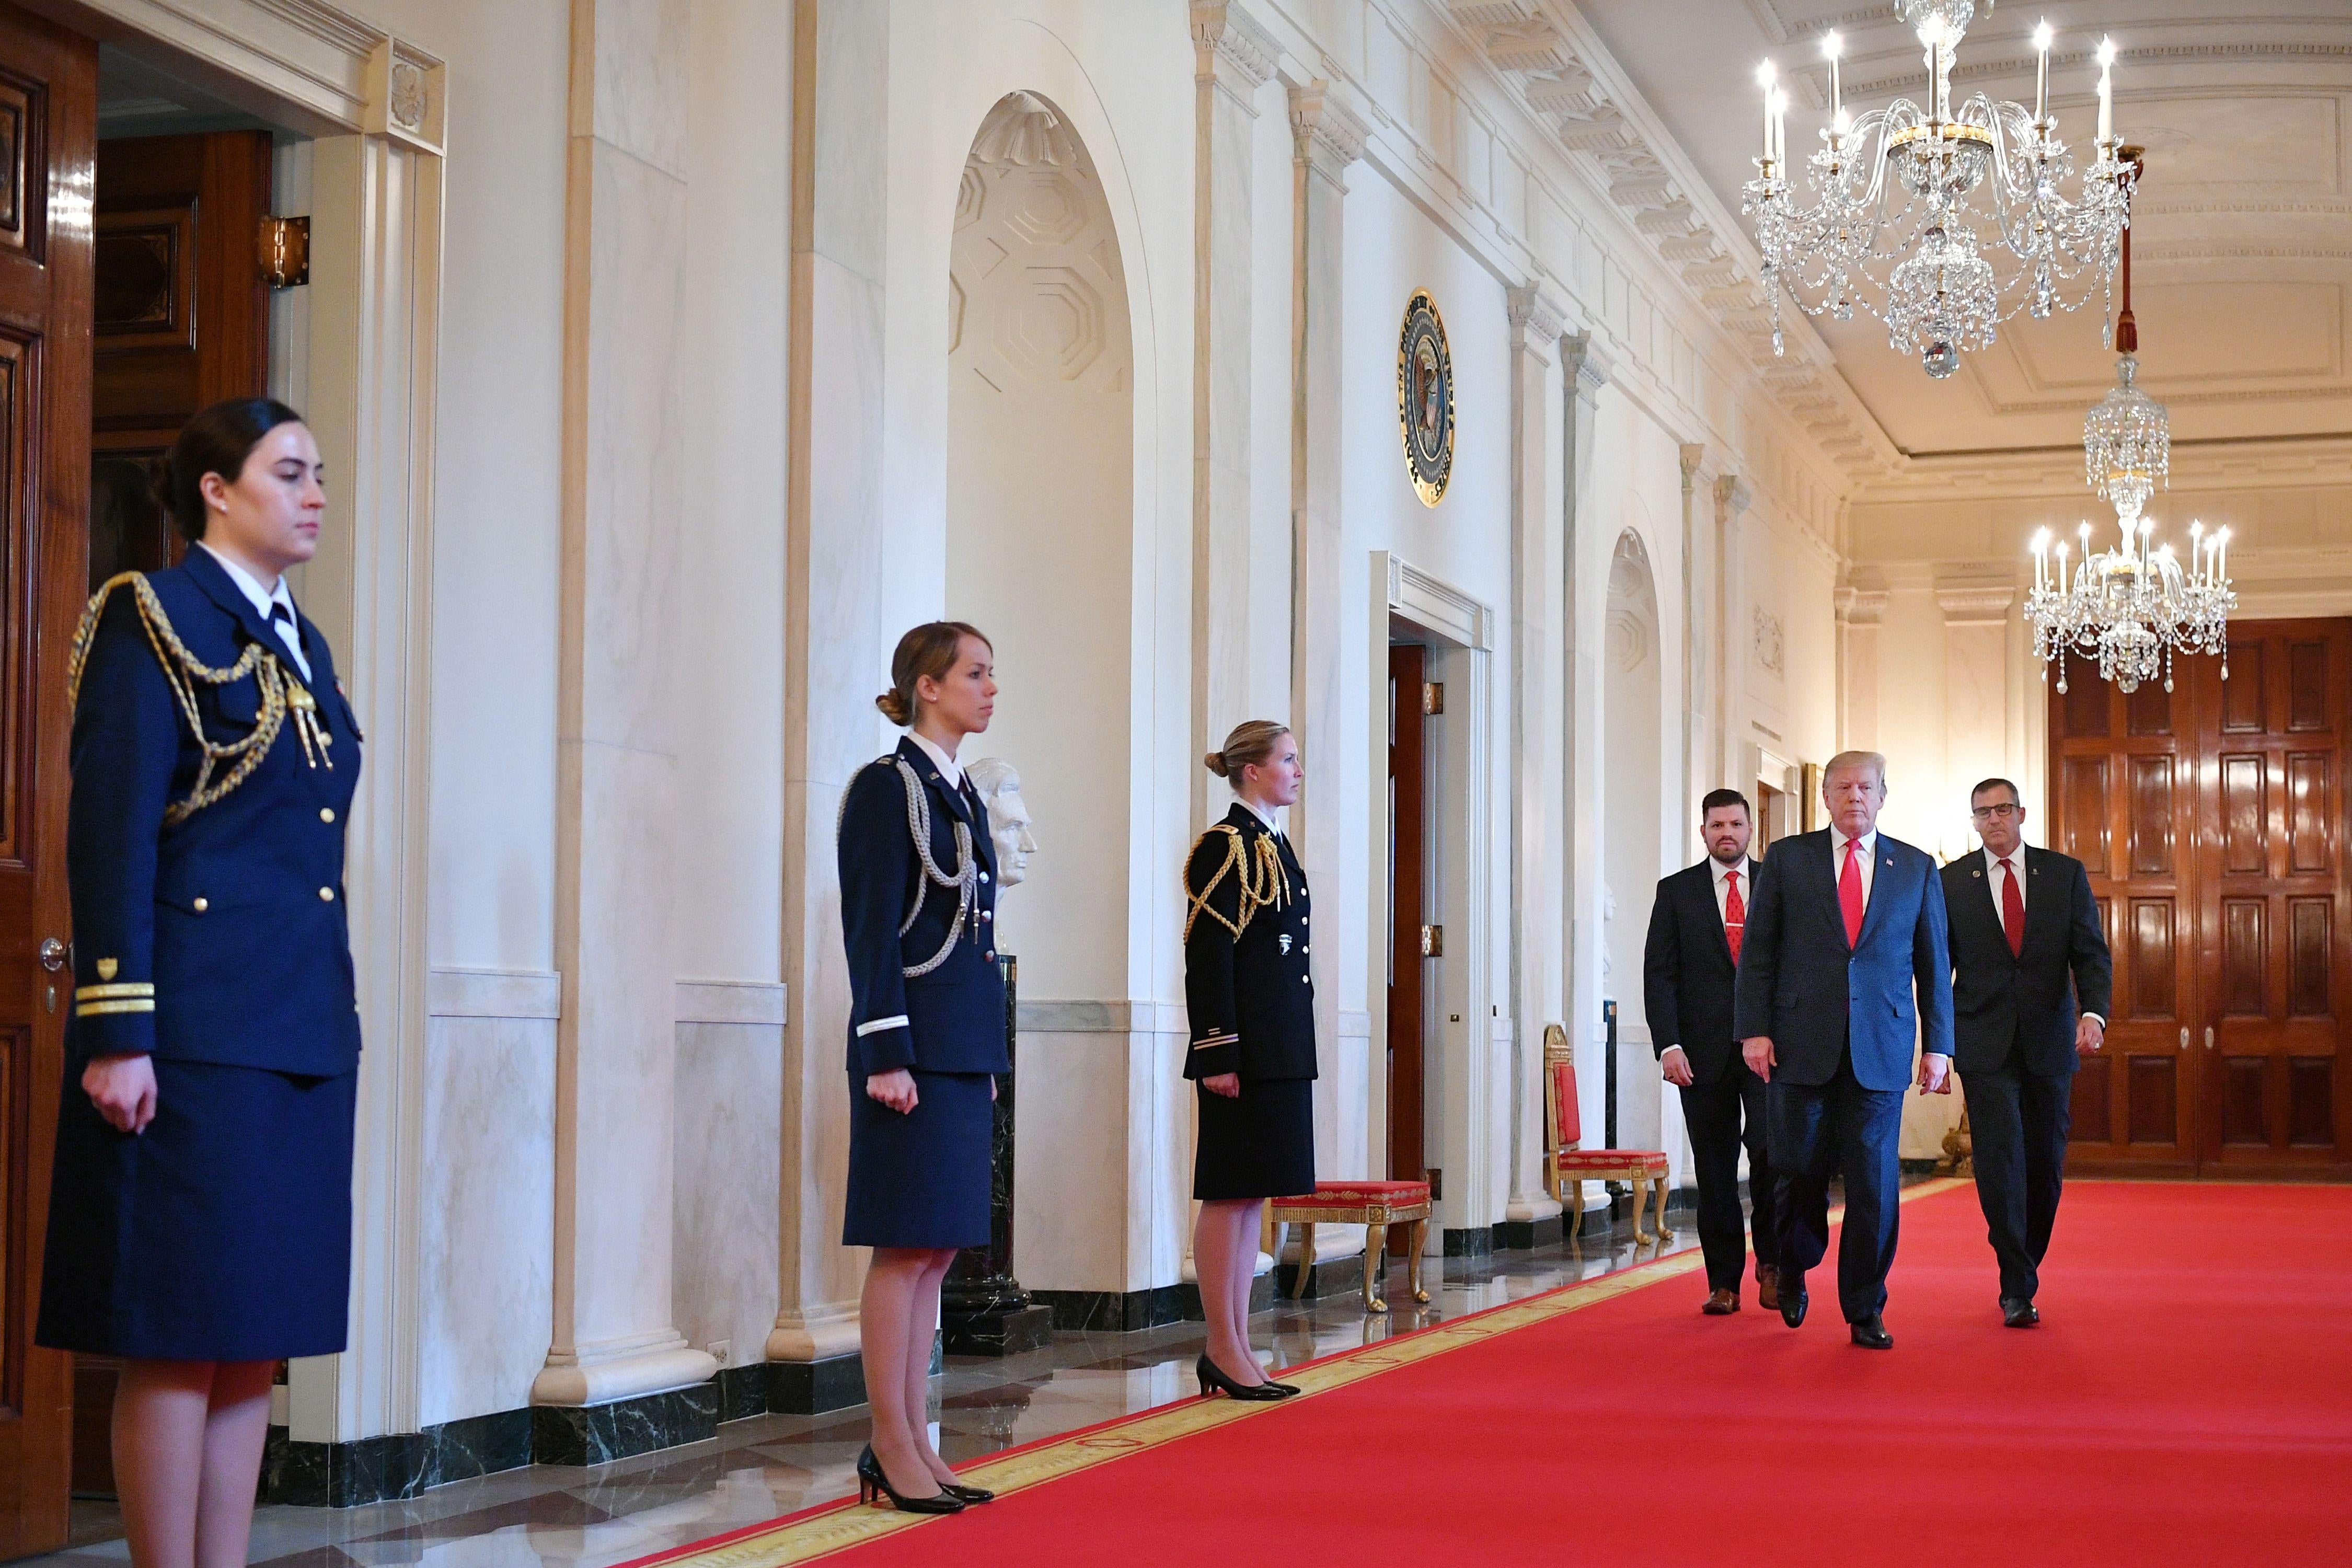 President Donald Trump walks through an ornate hall in the White House.